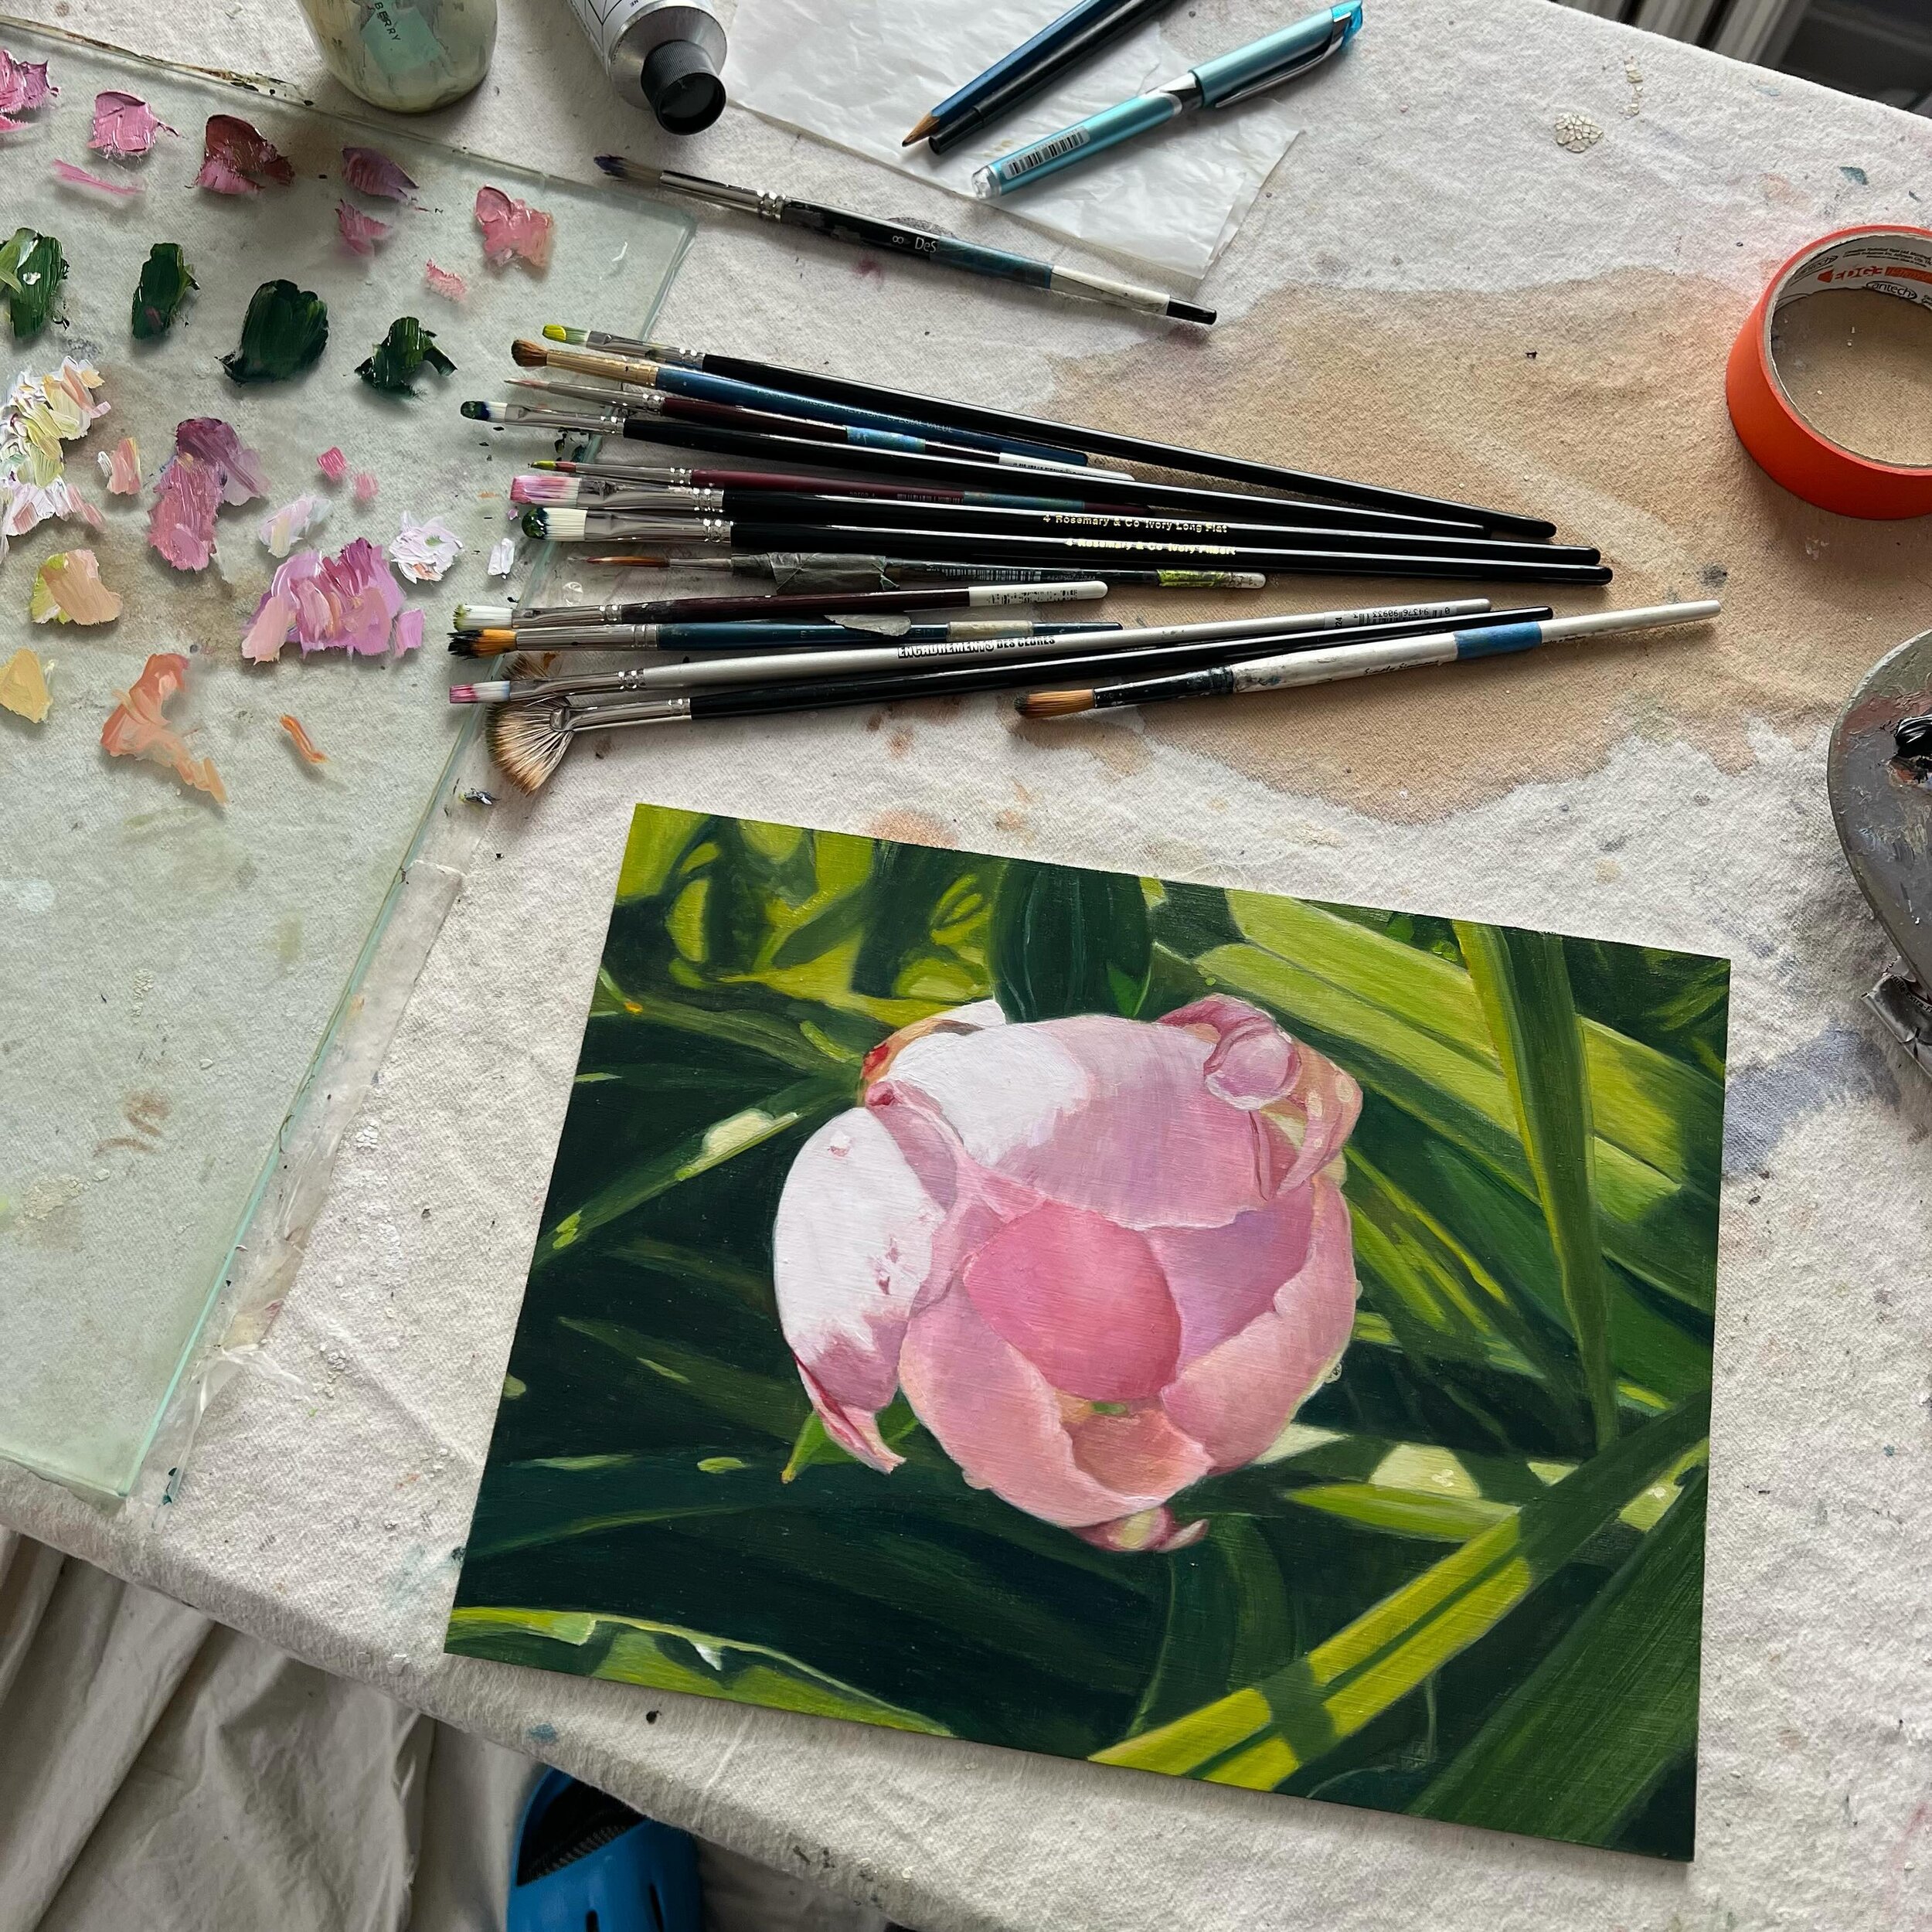 Warming up for some larger work while dreaming about Spring ☀️
.
.
.
#wip #ontheeasel #peony 
my favourite flower fyi 😁 
#oilonboard #oilpainting #canadianart #canadianartist🇨🇦 #naturepatterns #flowers #pinkpeony #lightandshadow #contemporaryart #